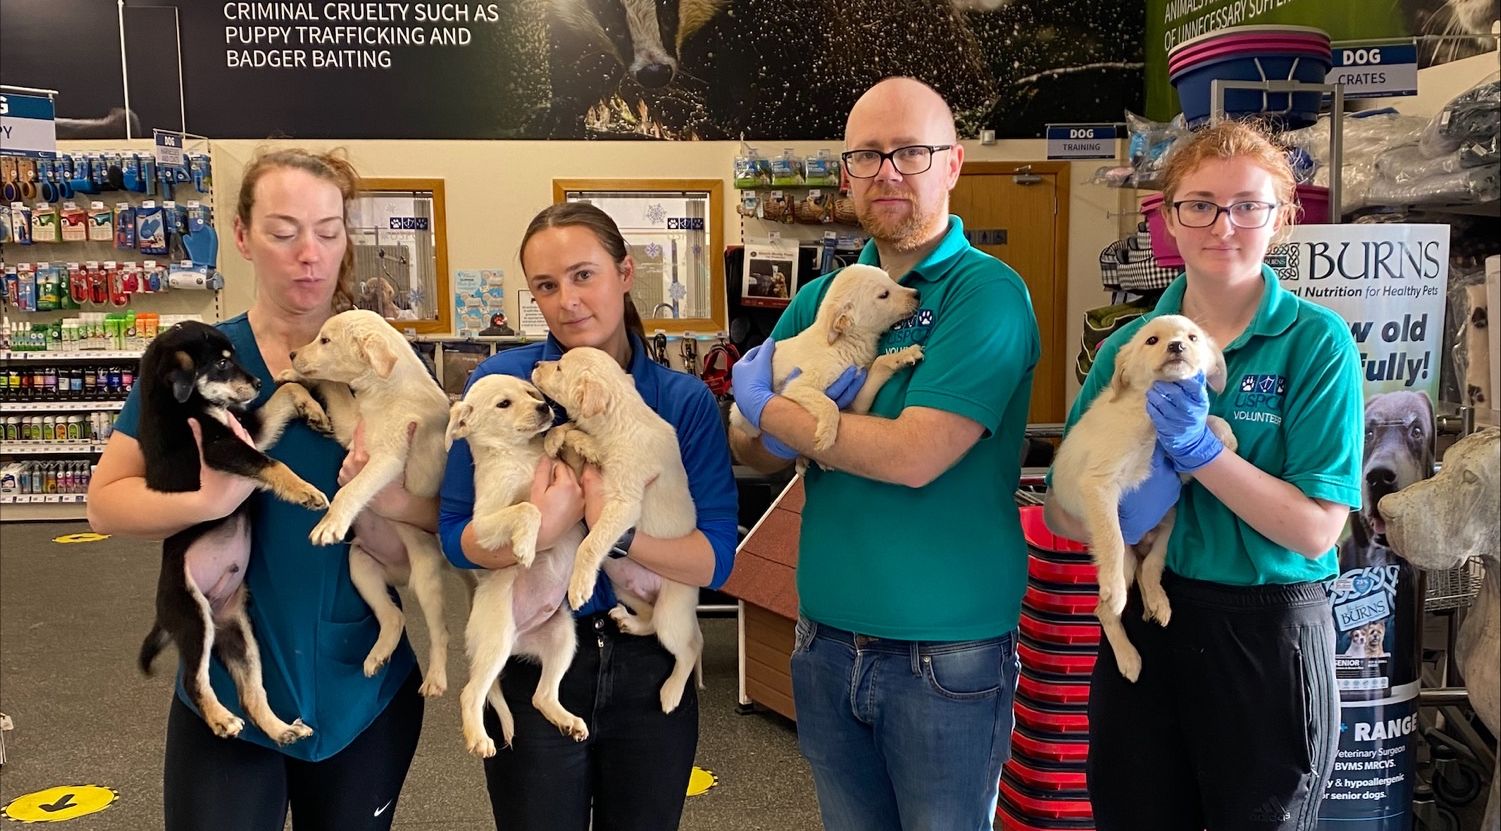 Latest case of abandoned puppies 'shocks' NI animal welfare charity as  warning issued 